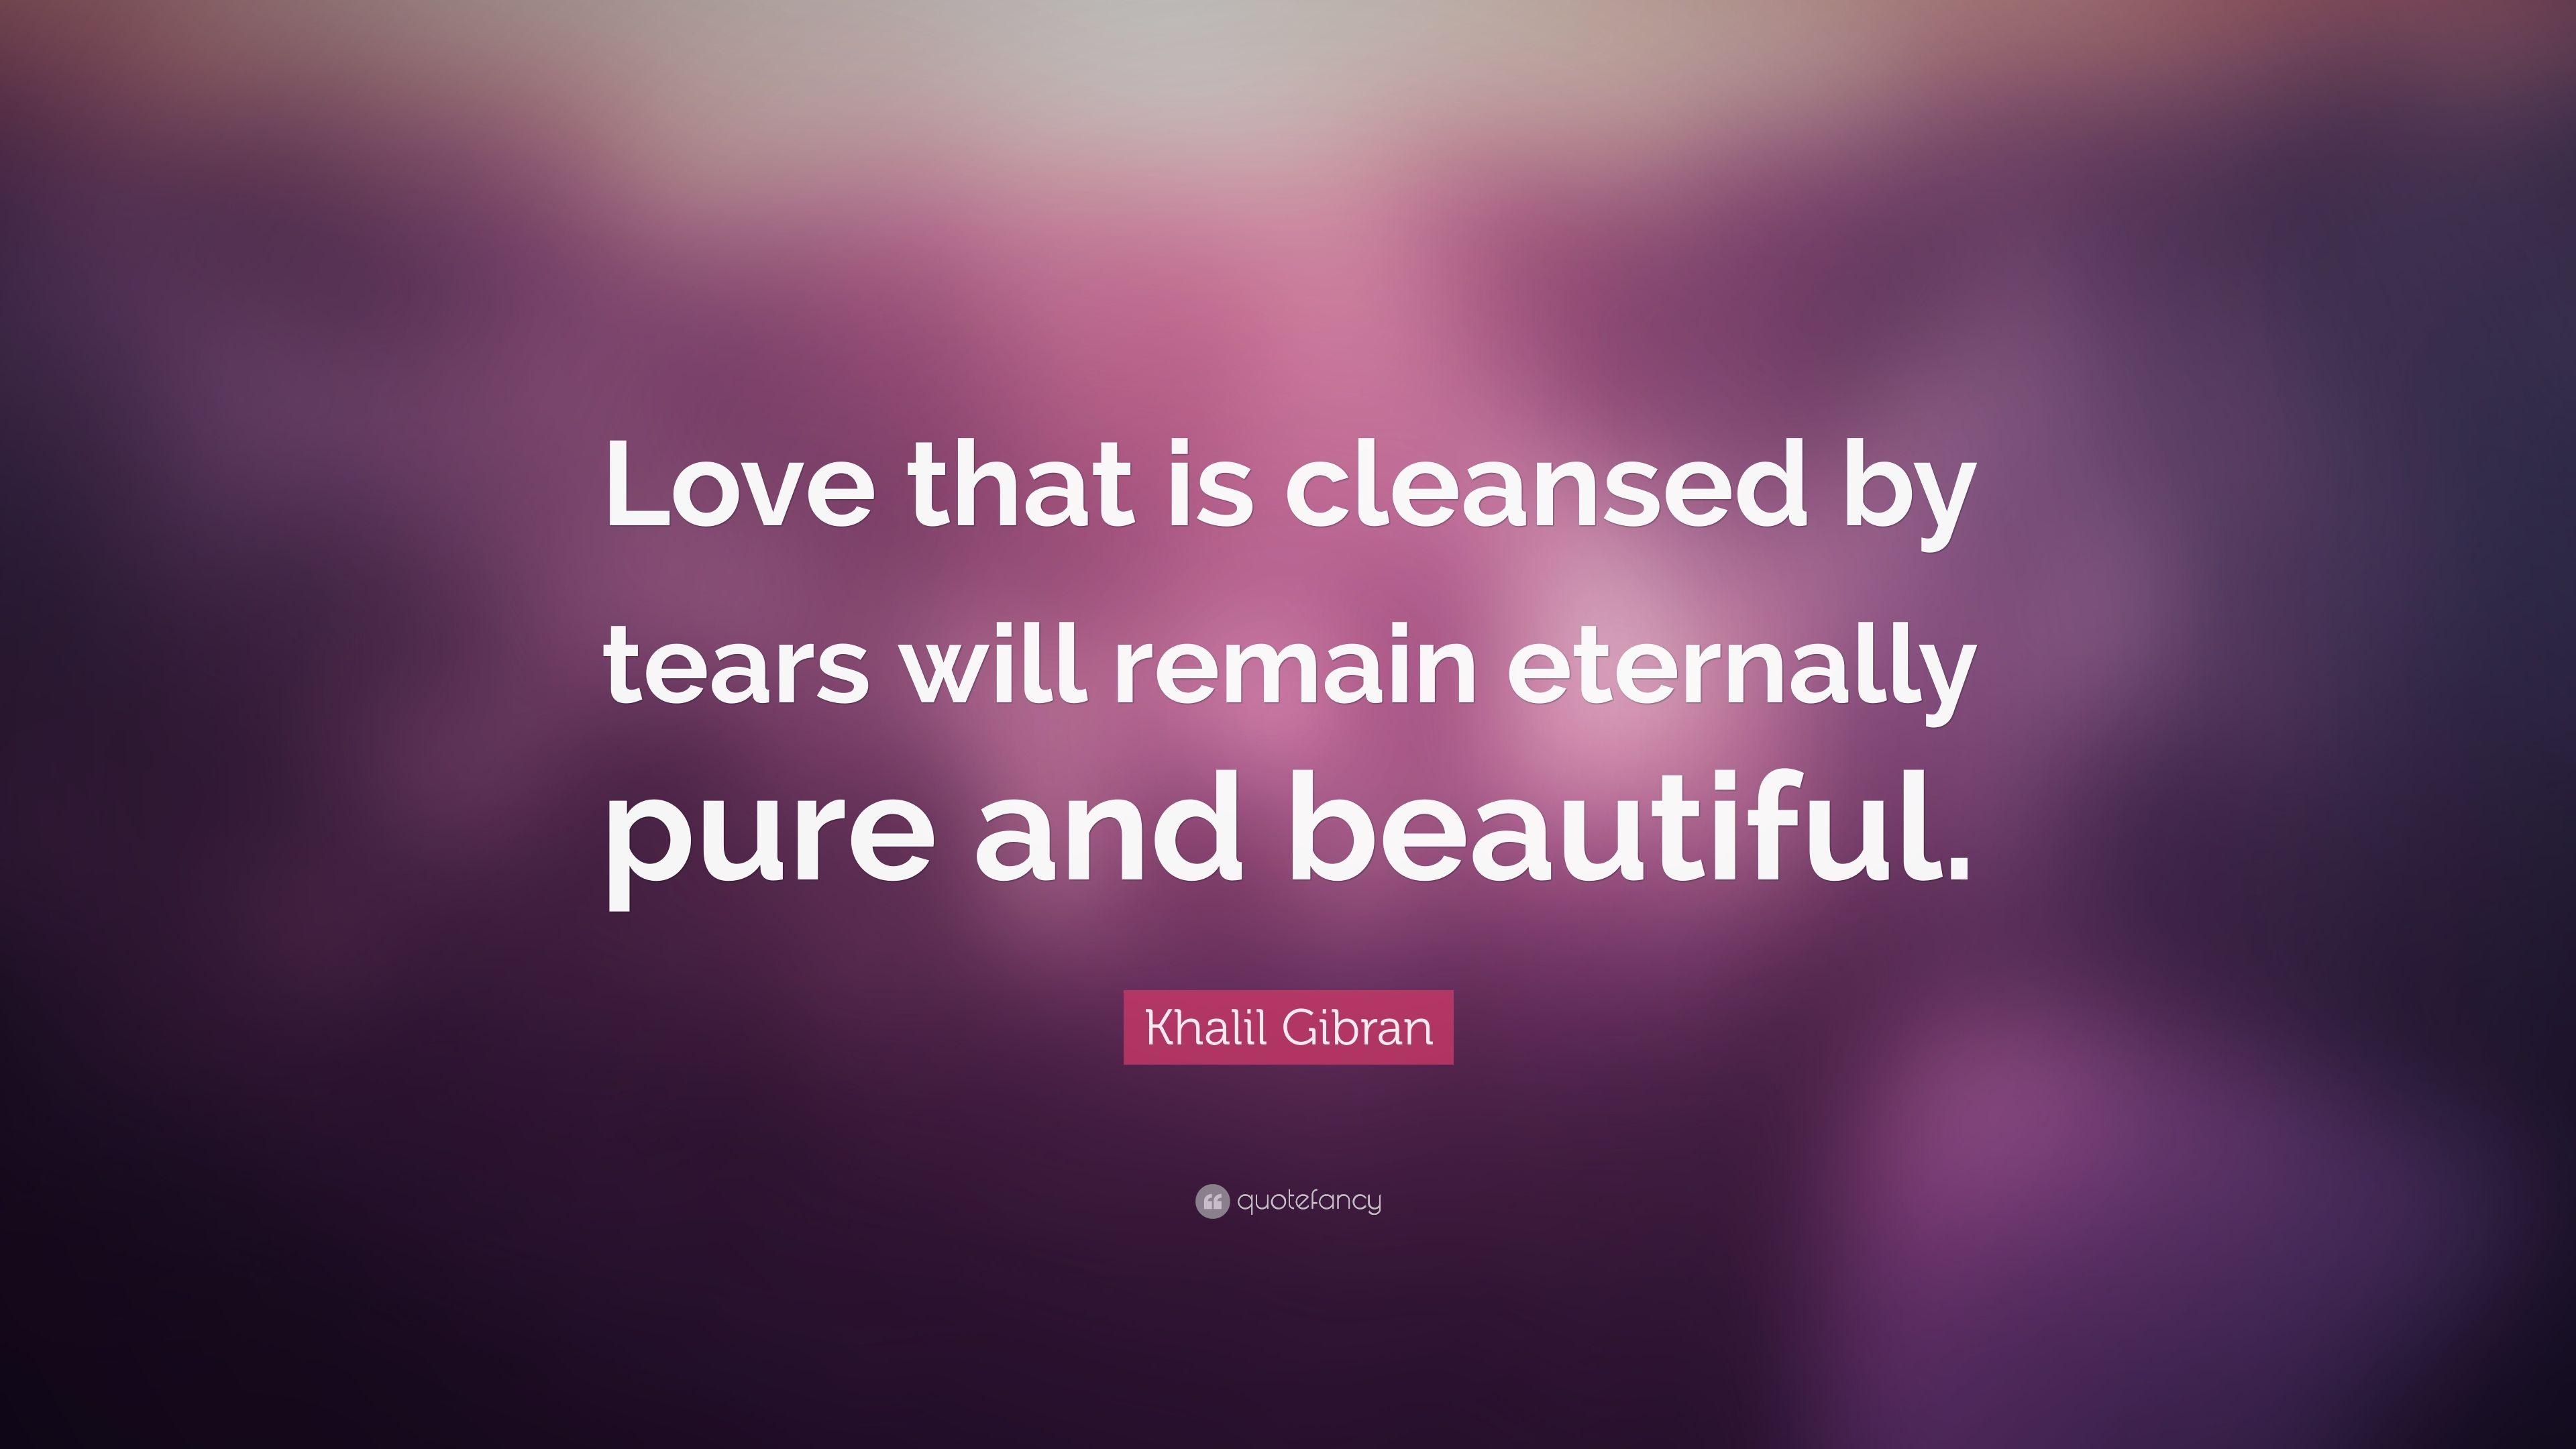 Khalil Gibran Quote: “Love that is cleansed by tears will remain